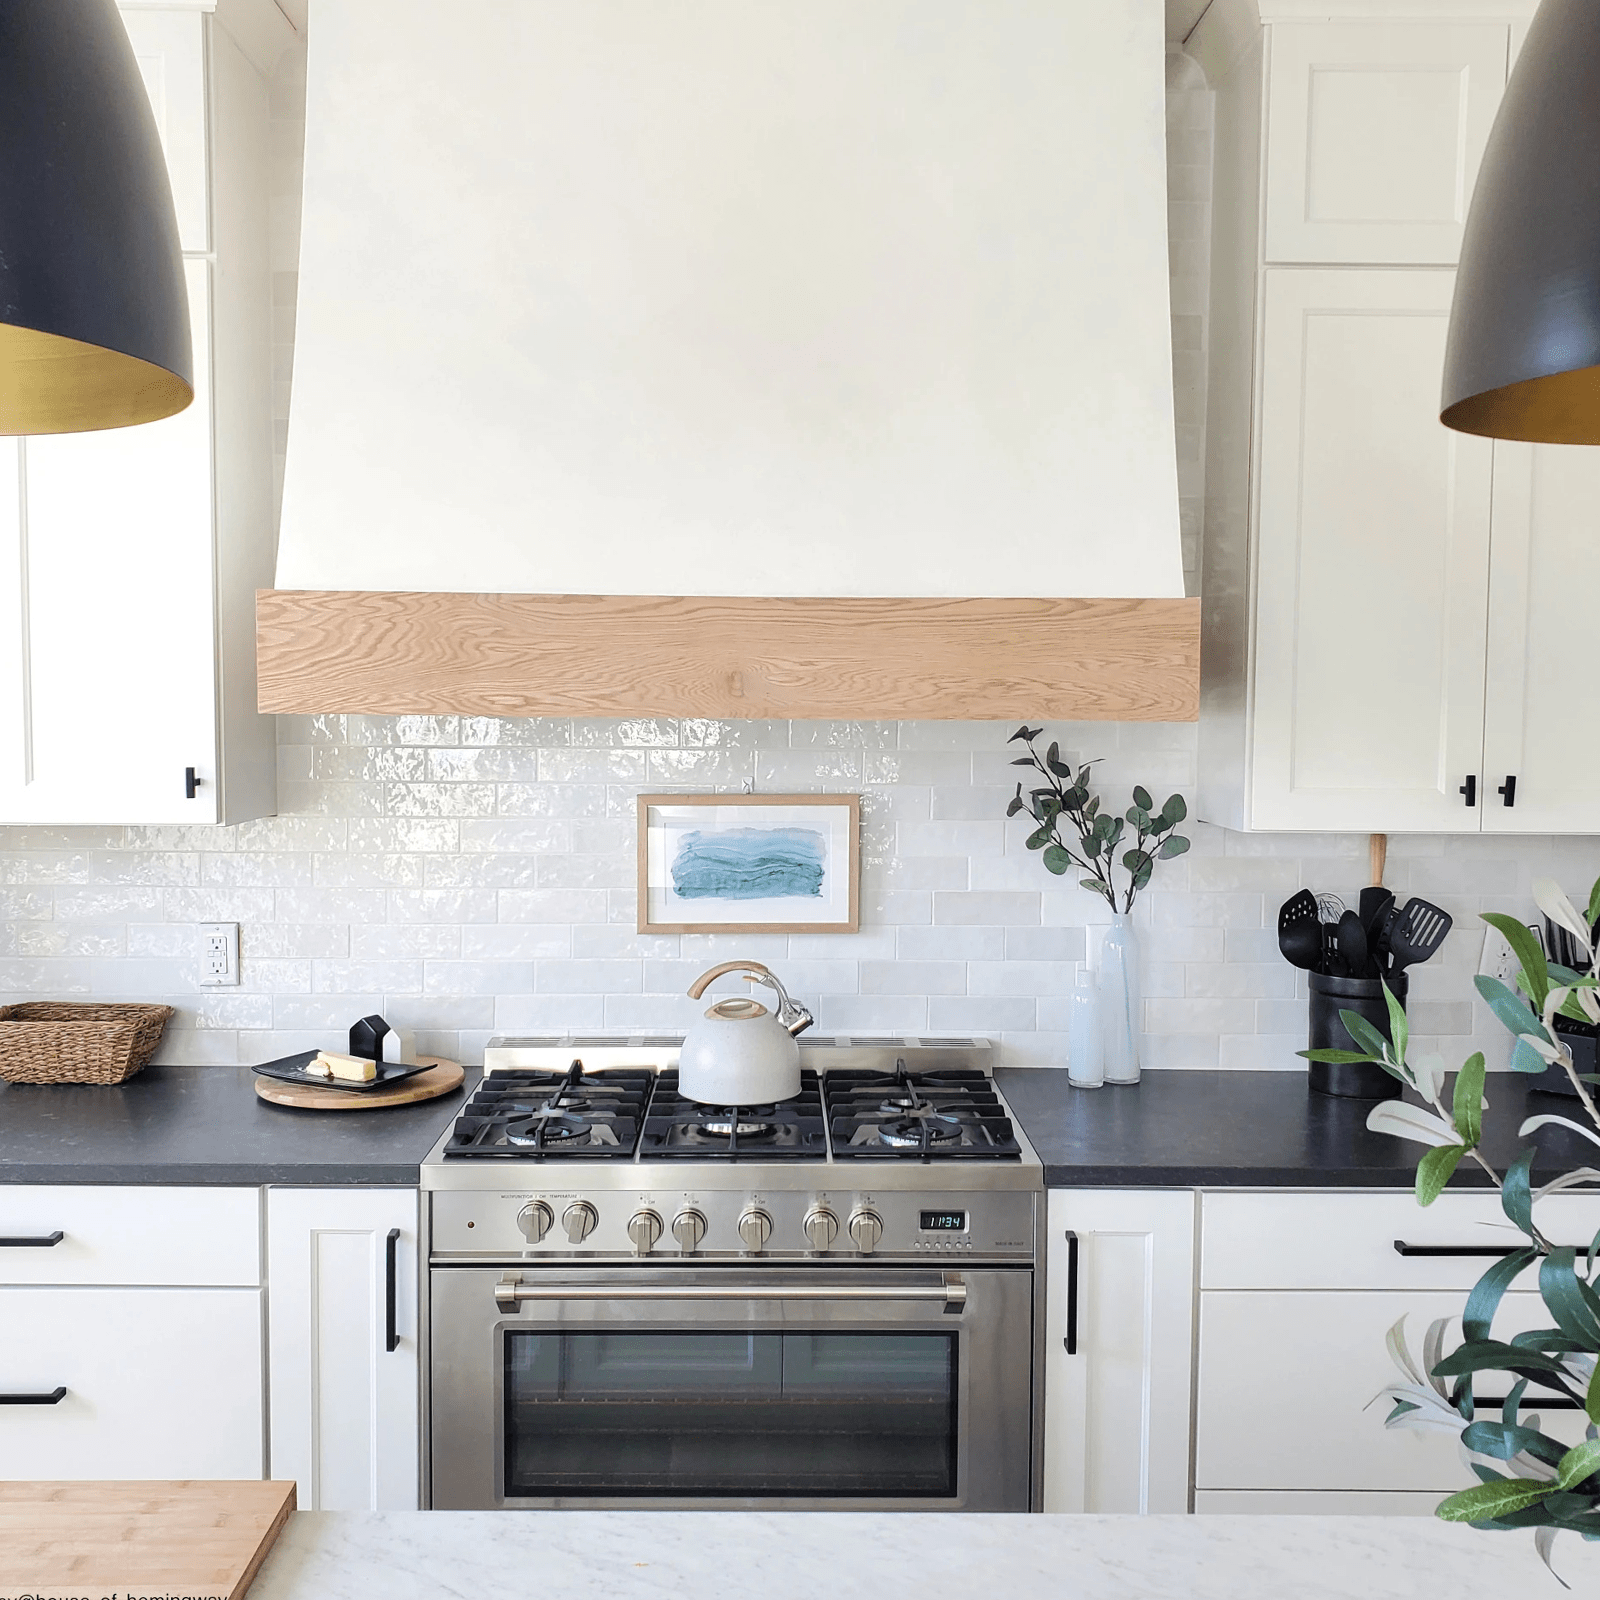 These Are the Best Tile Options for Your Kitchen Backsplash